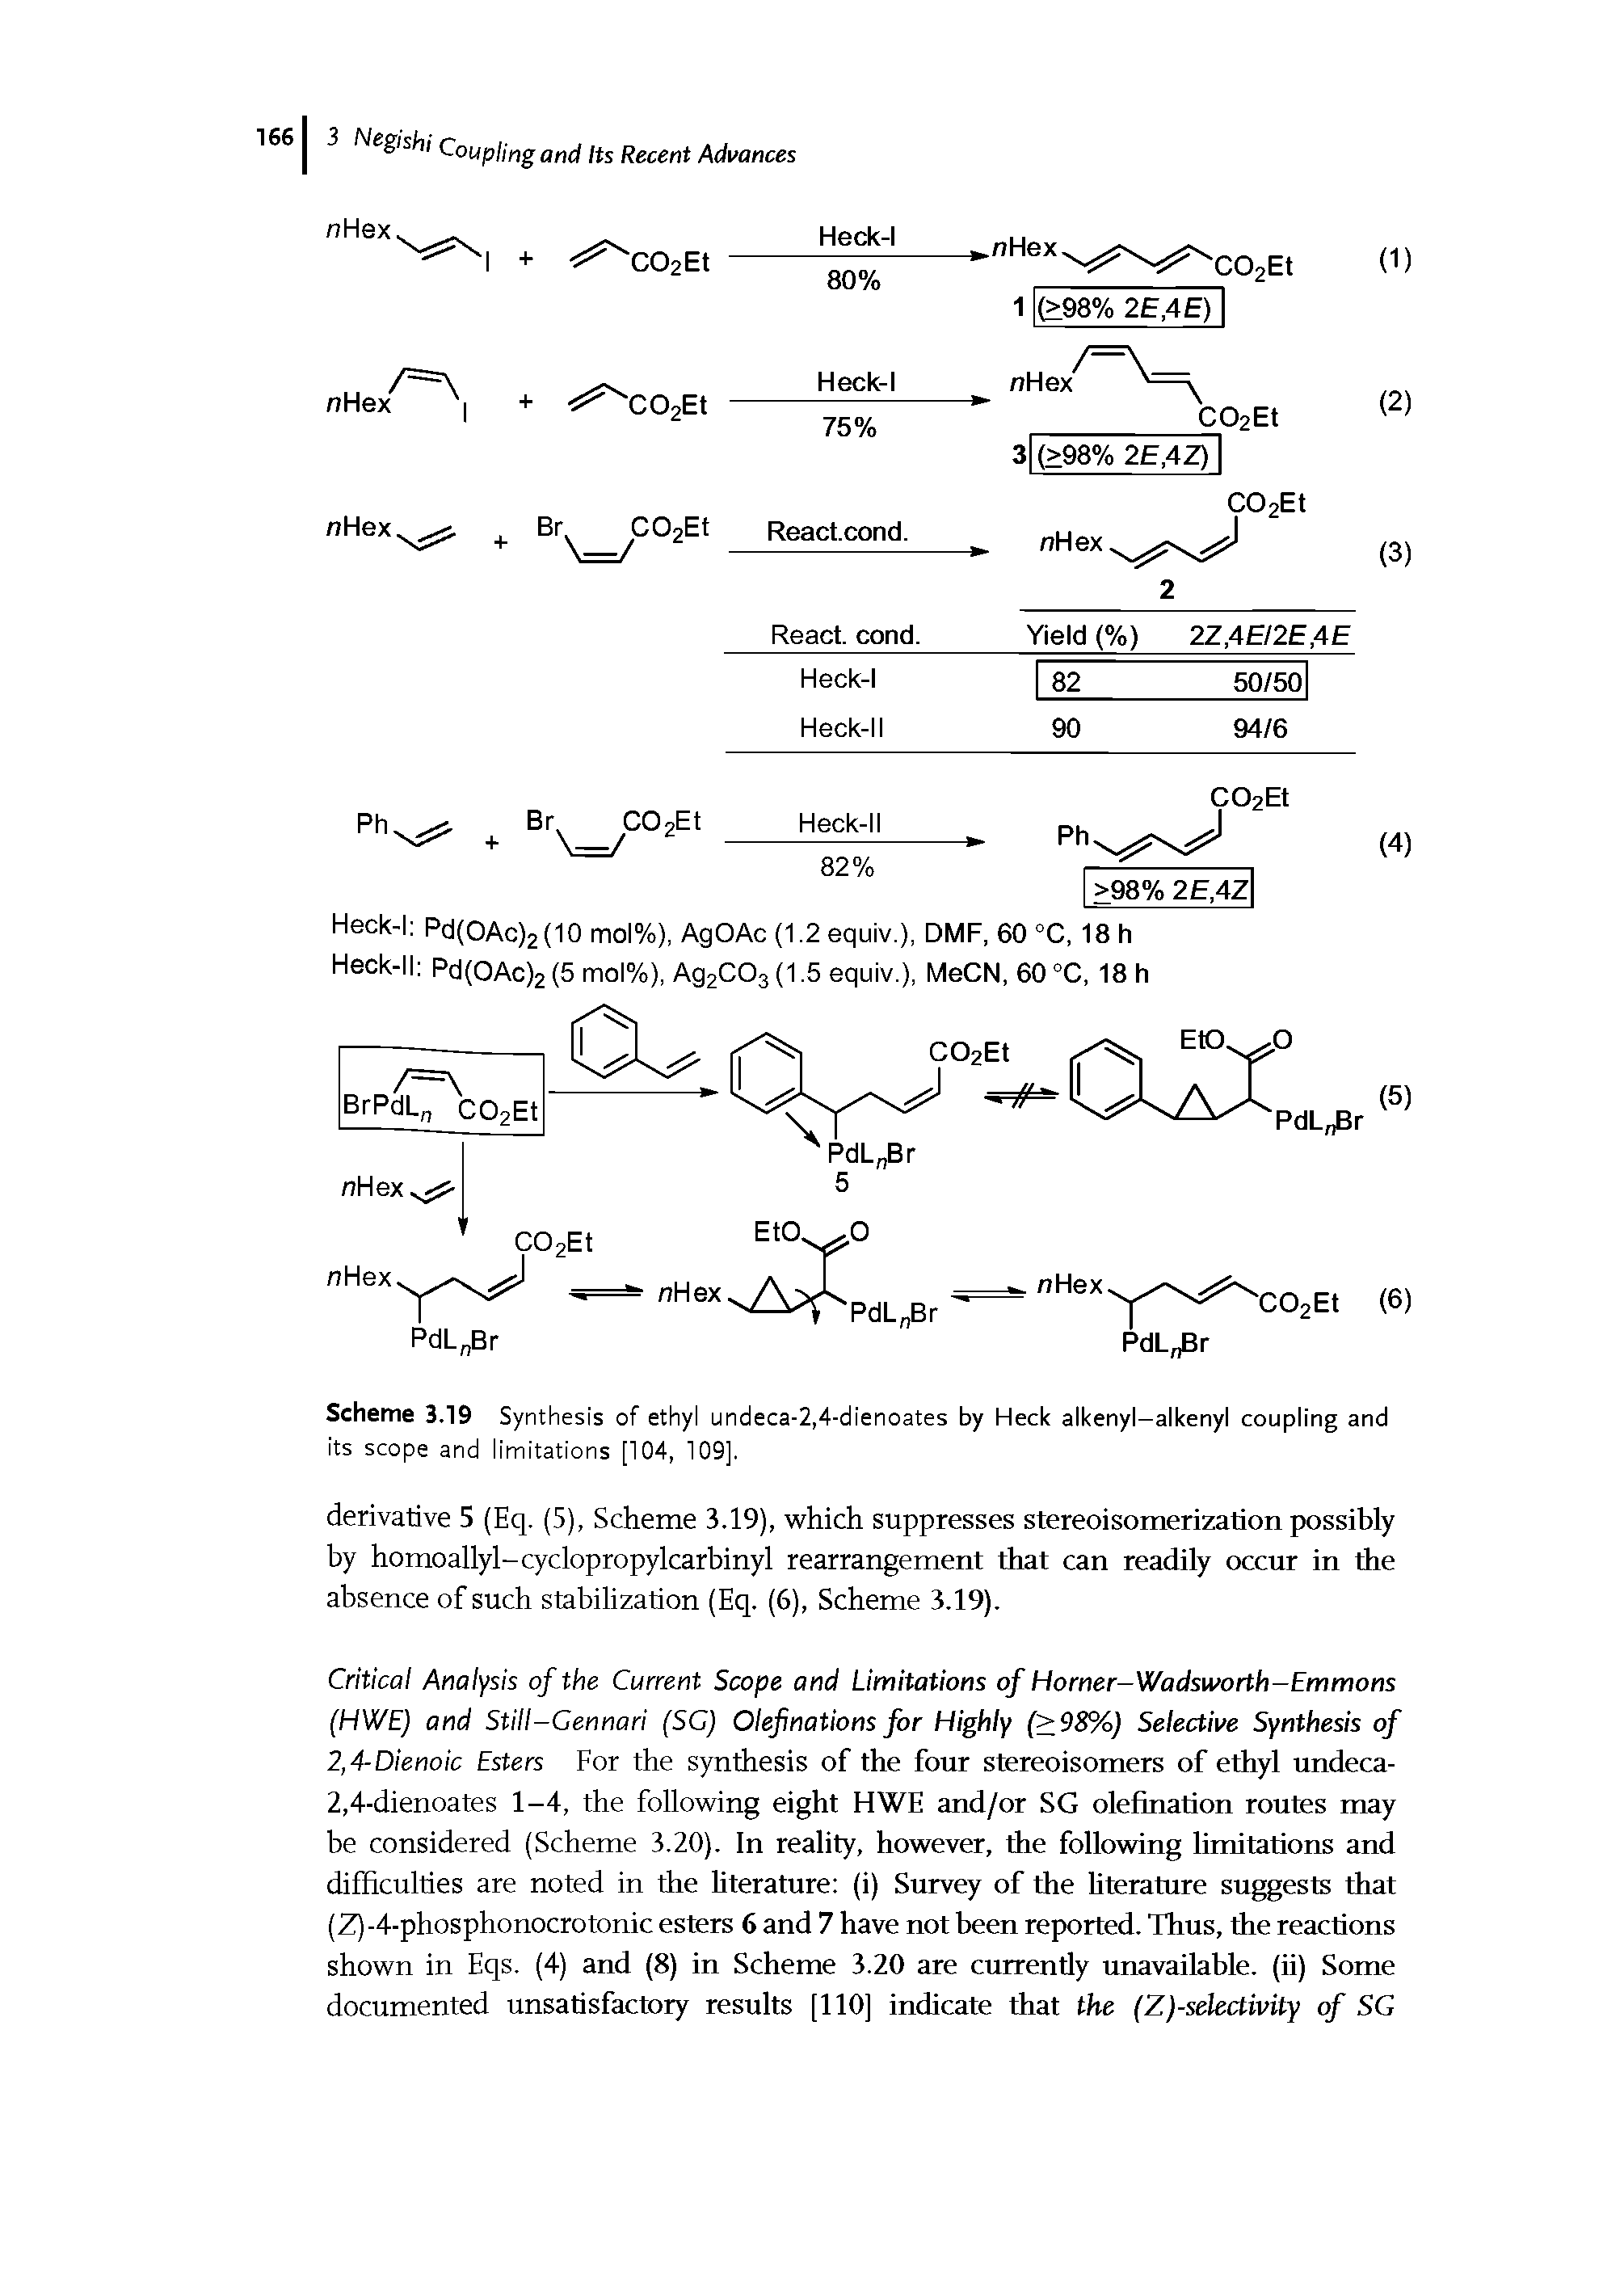 Scheme 3.19 Synthesis of ethyl undeca-2,4-dienoates by Heck alkenyl-alkenyl coupling and its scope and limitations [104, 109].